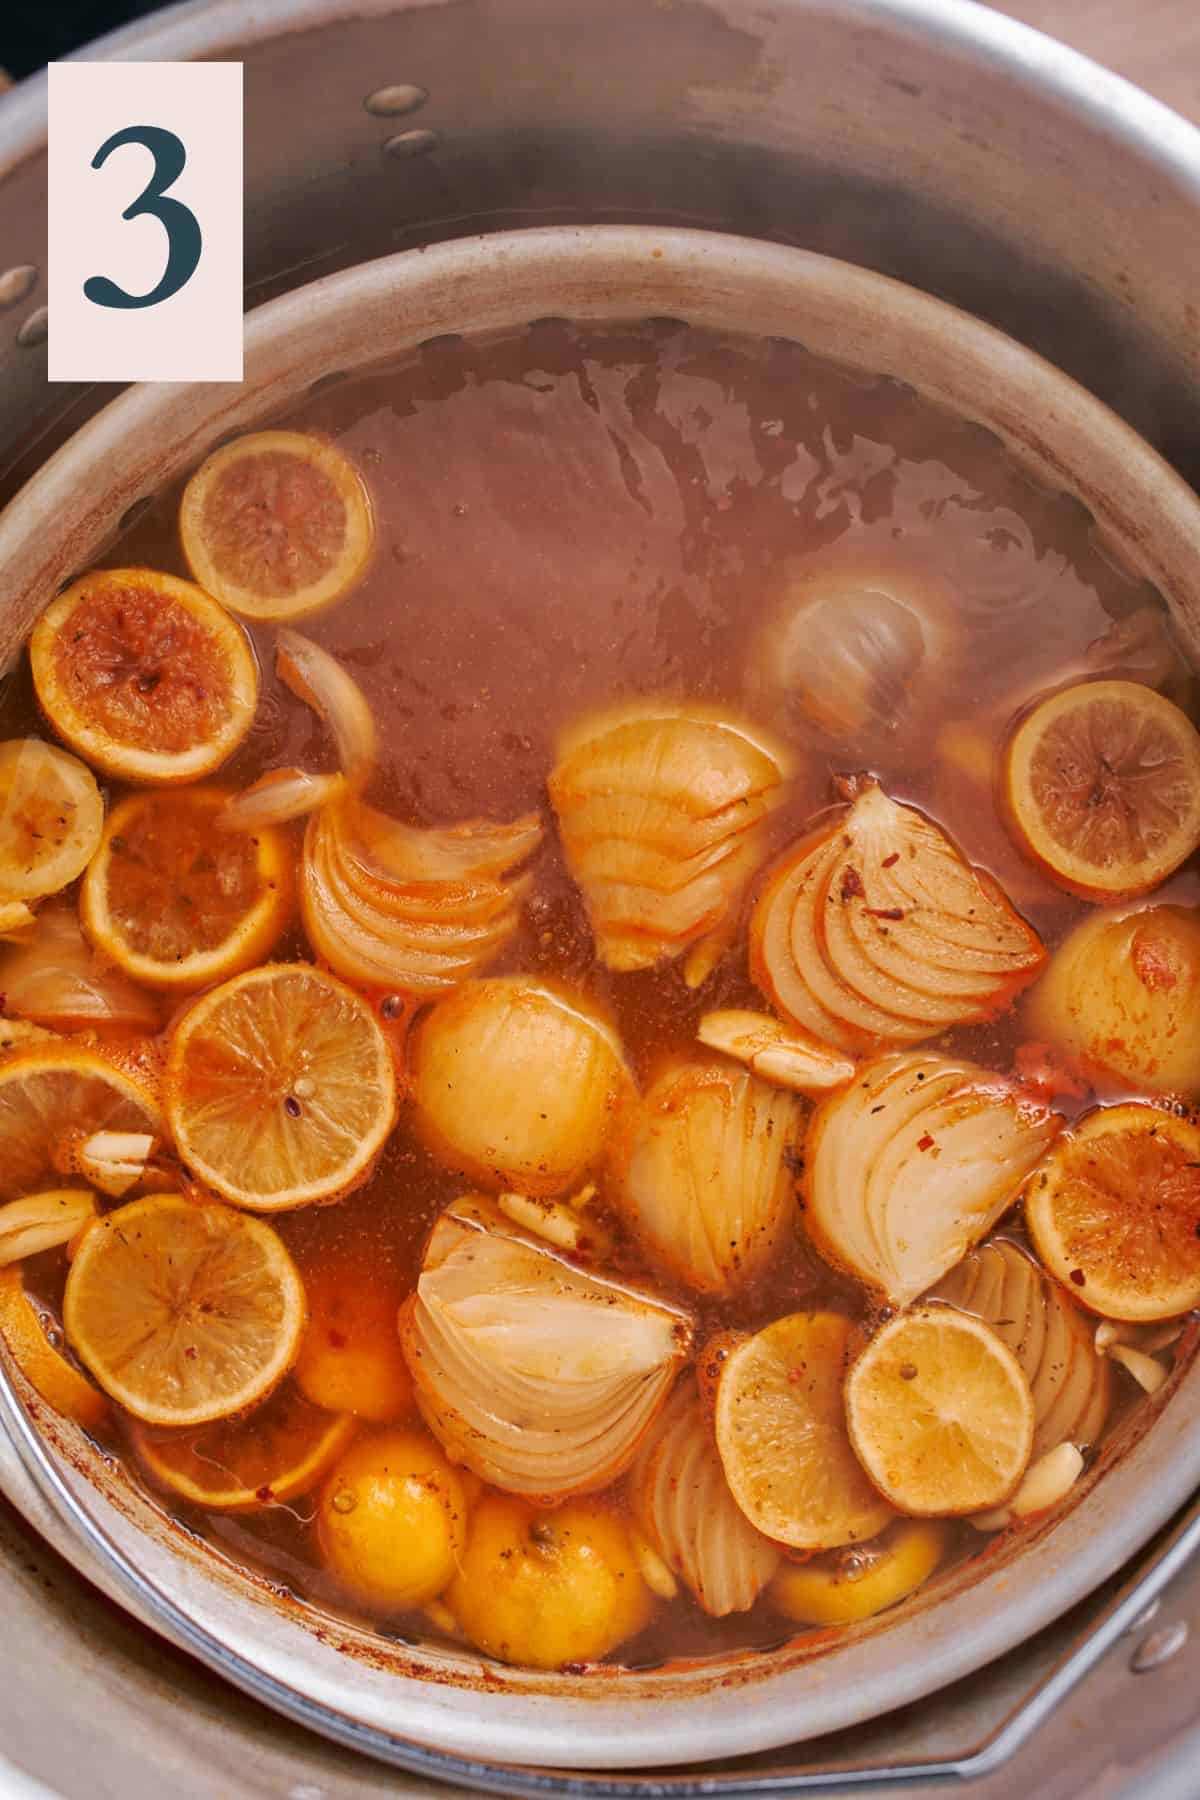 cooked lemons, garlic, and onions in a spicy broth.